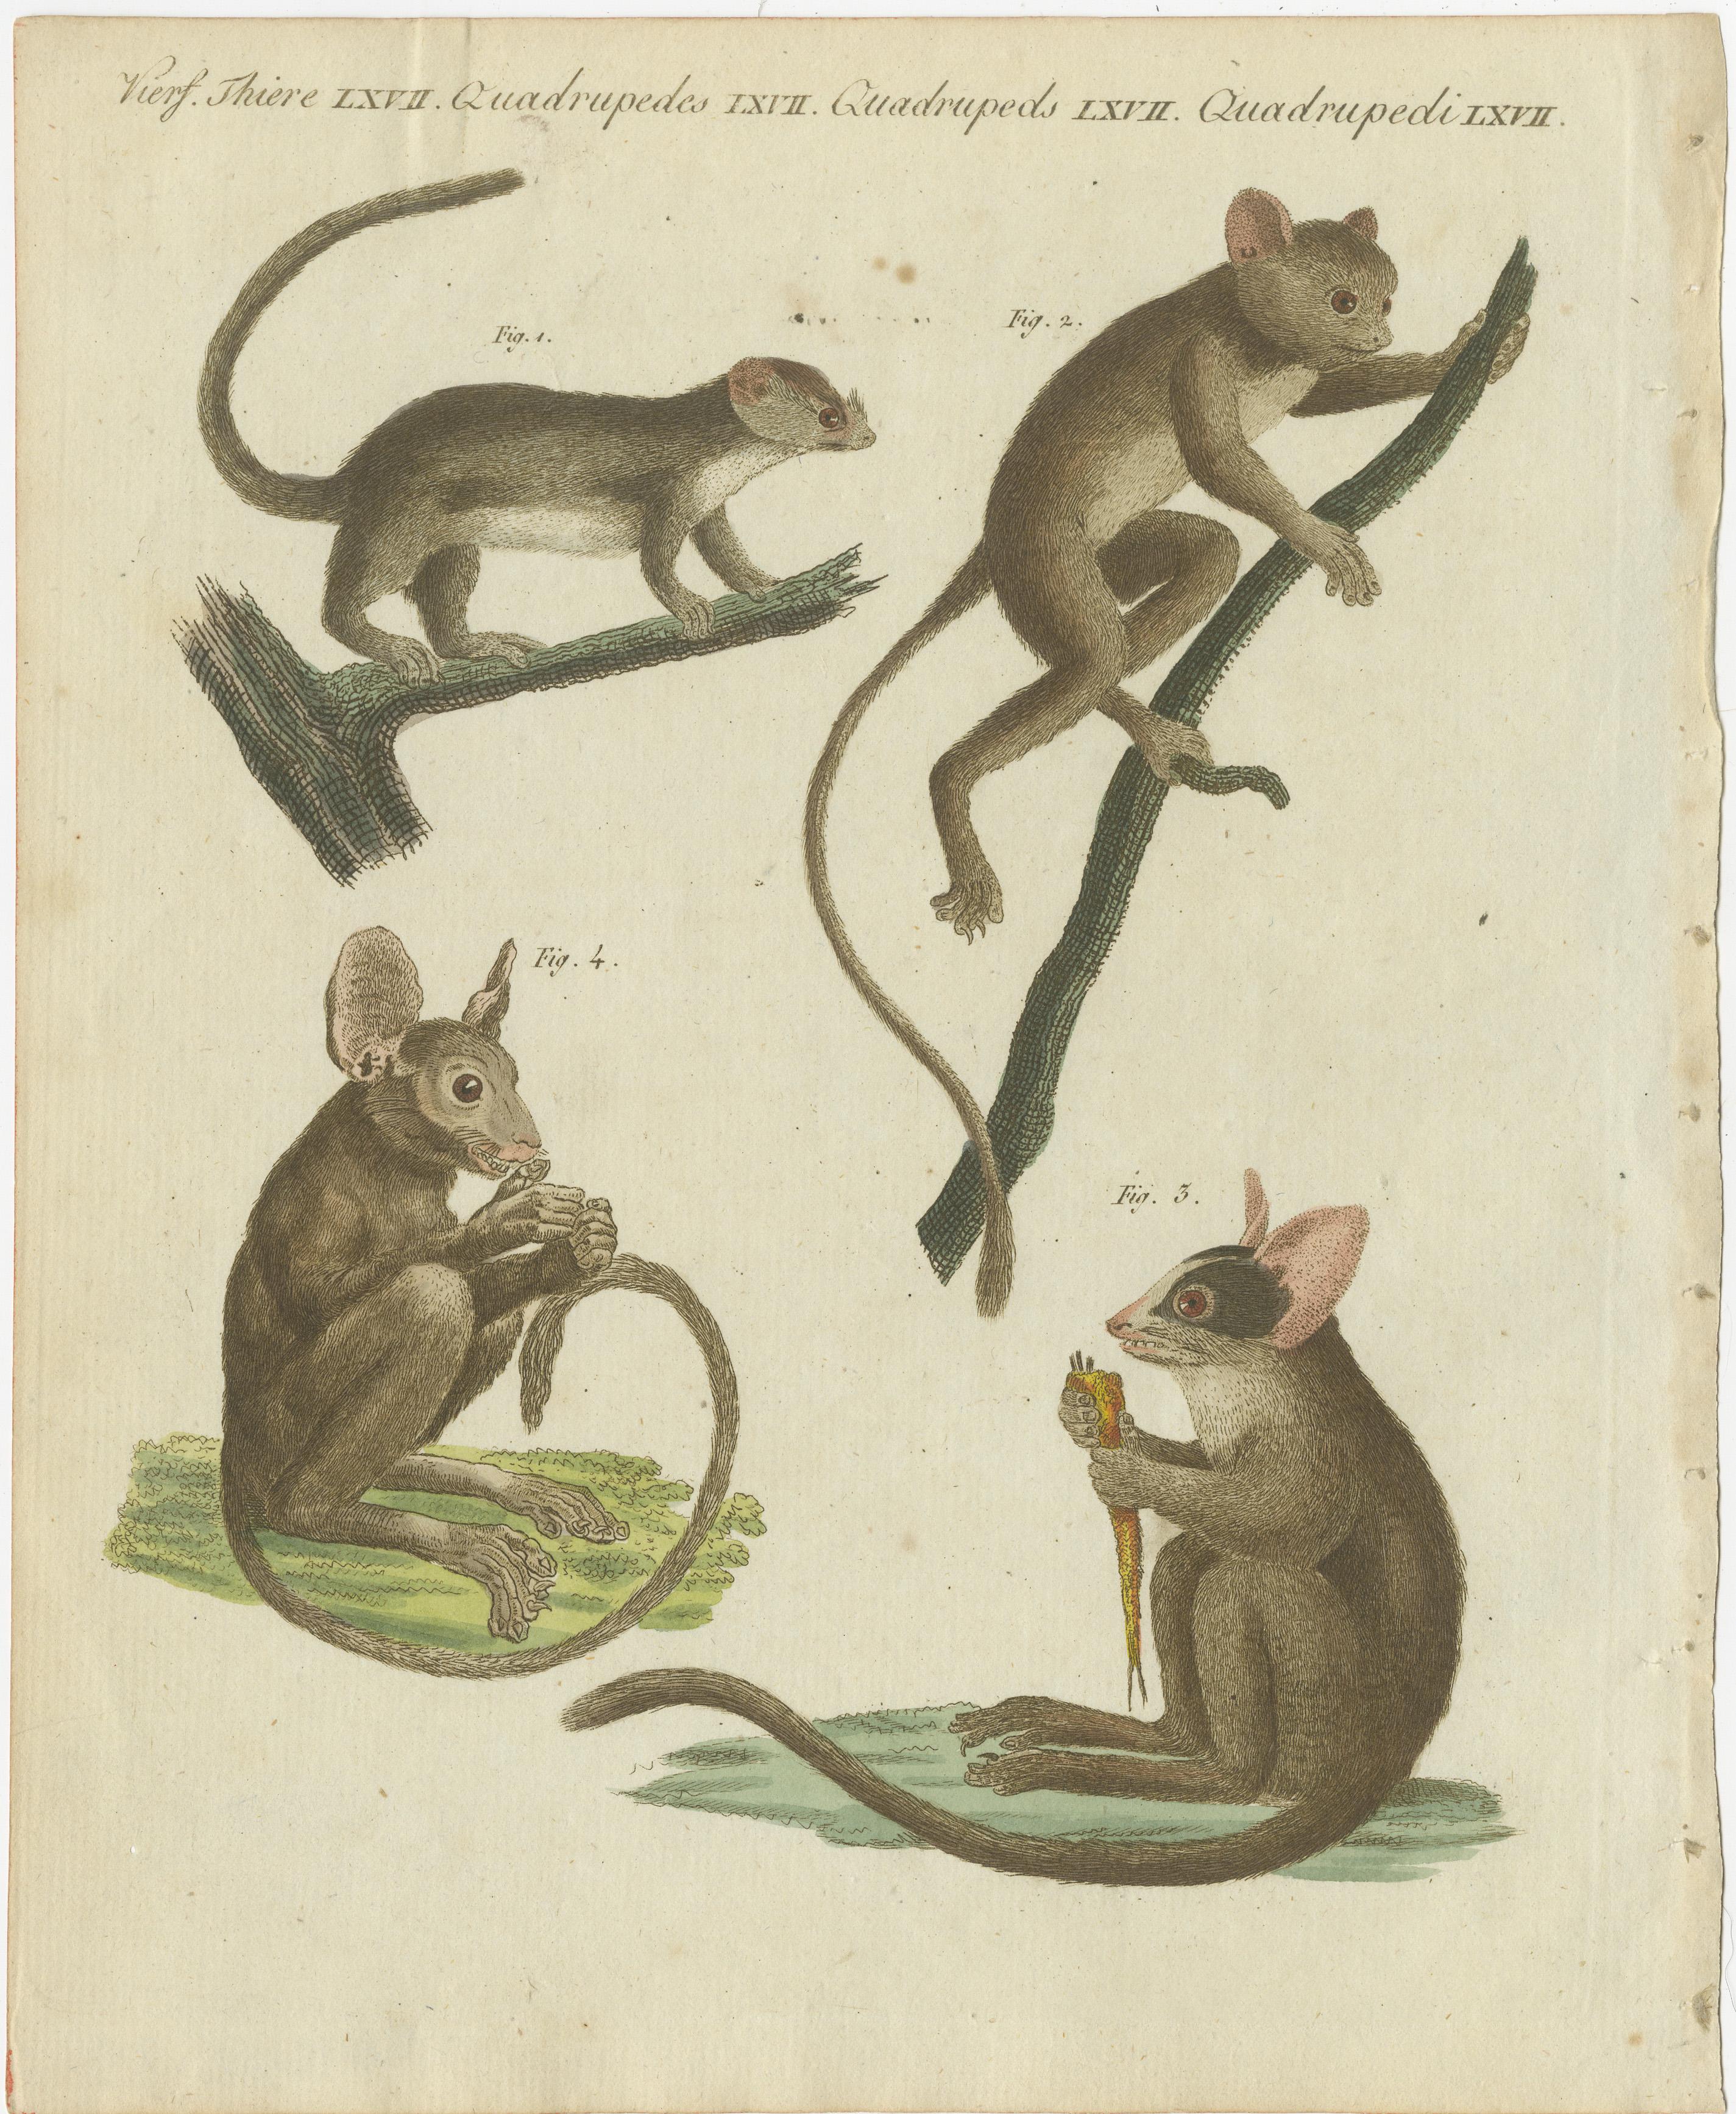 Original antique print of maki or lemur pieces. This print originates from 'Bilderbuch fur Kinder' by F.J. Bertuch. Friedrich Johann Bertuch (1747-1822) was a German publisher and man of arts most famous for his 12-volume encyclopedia for children